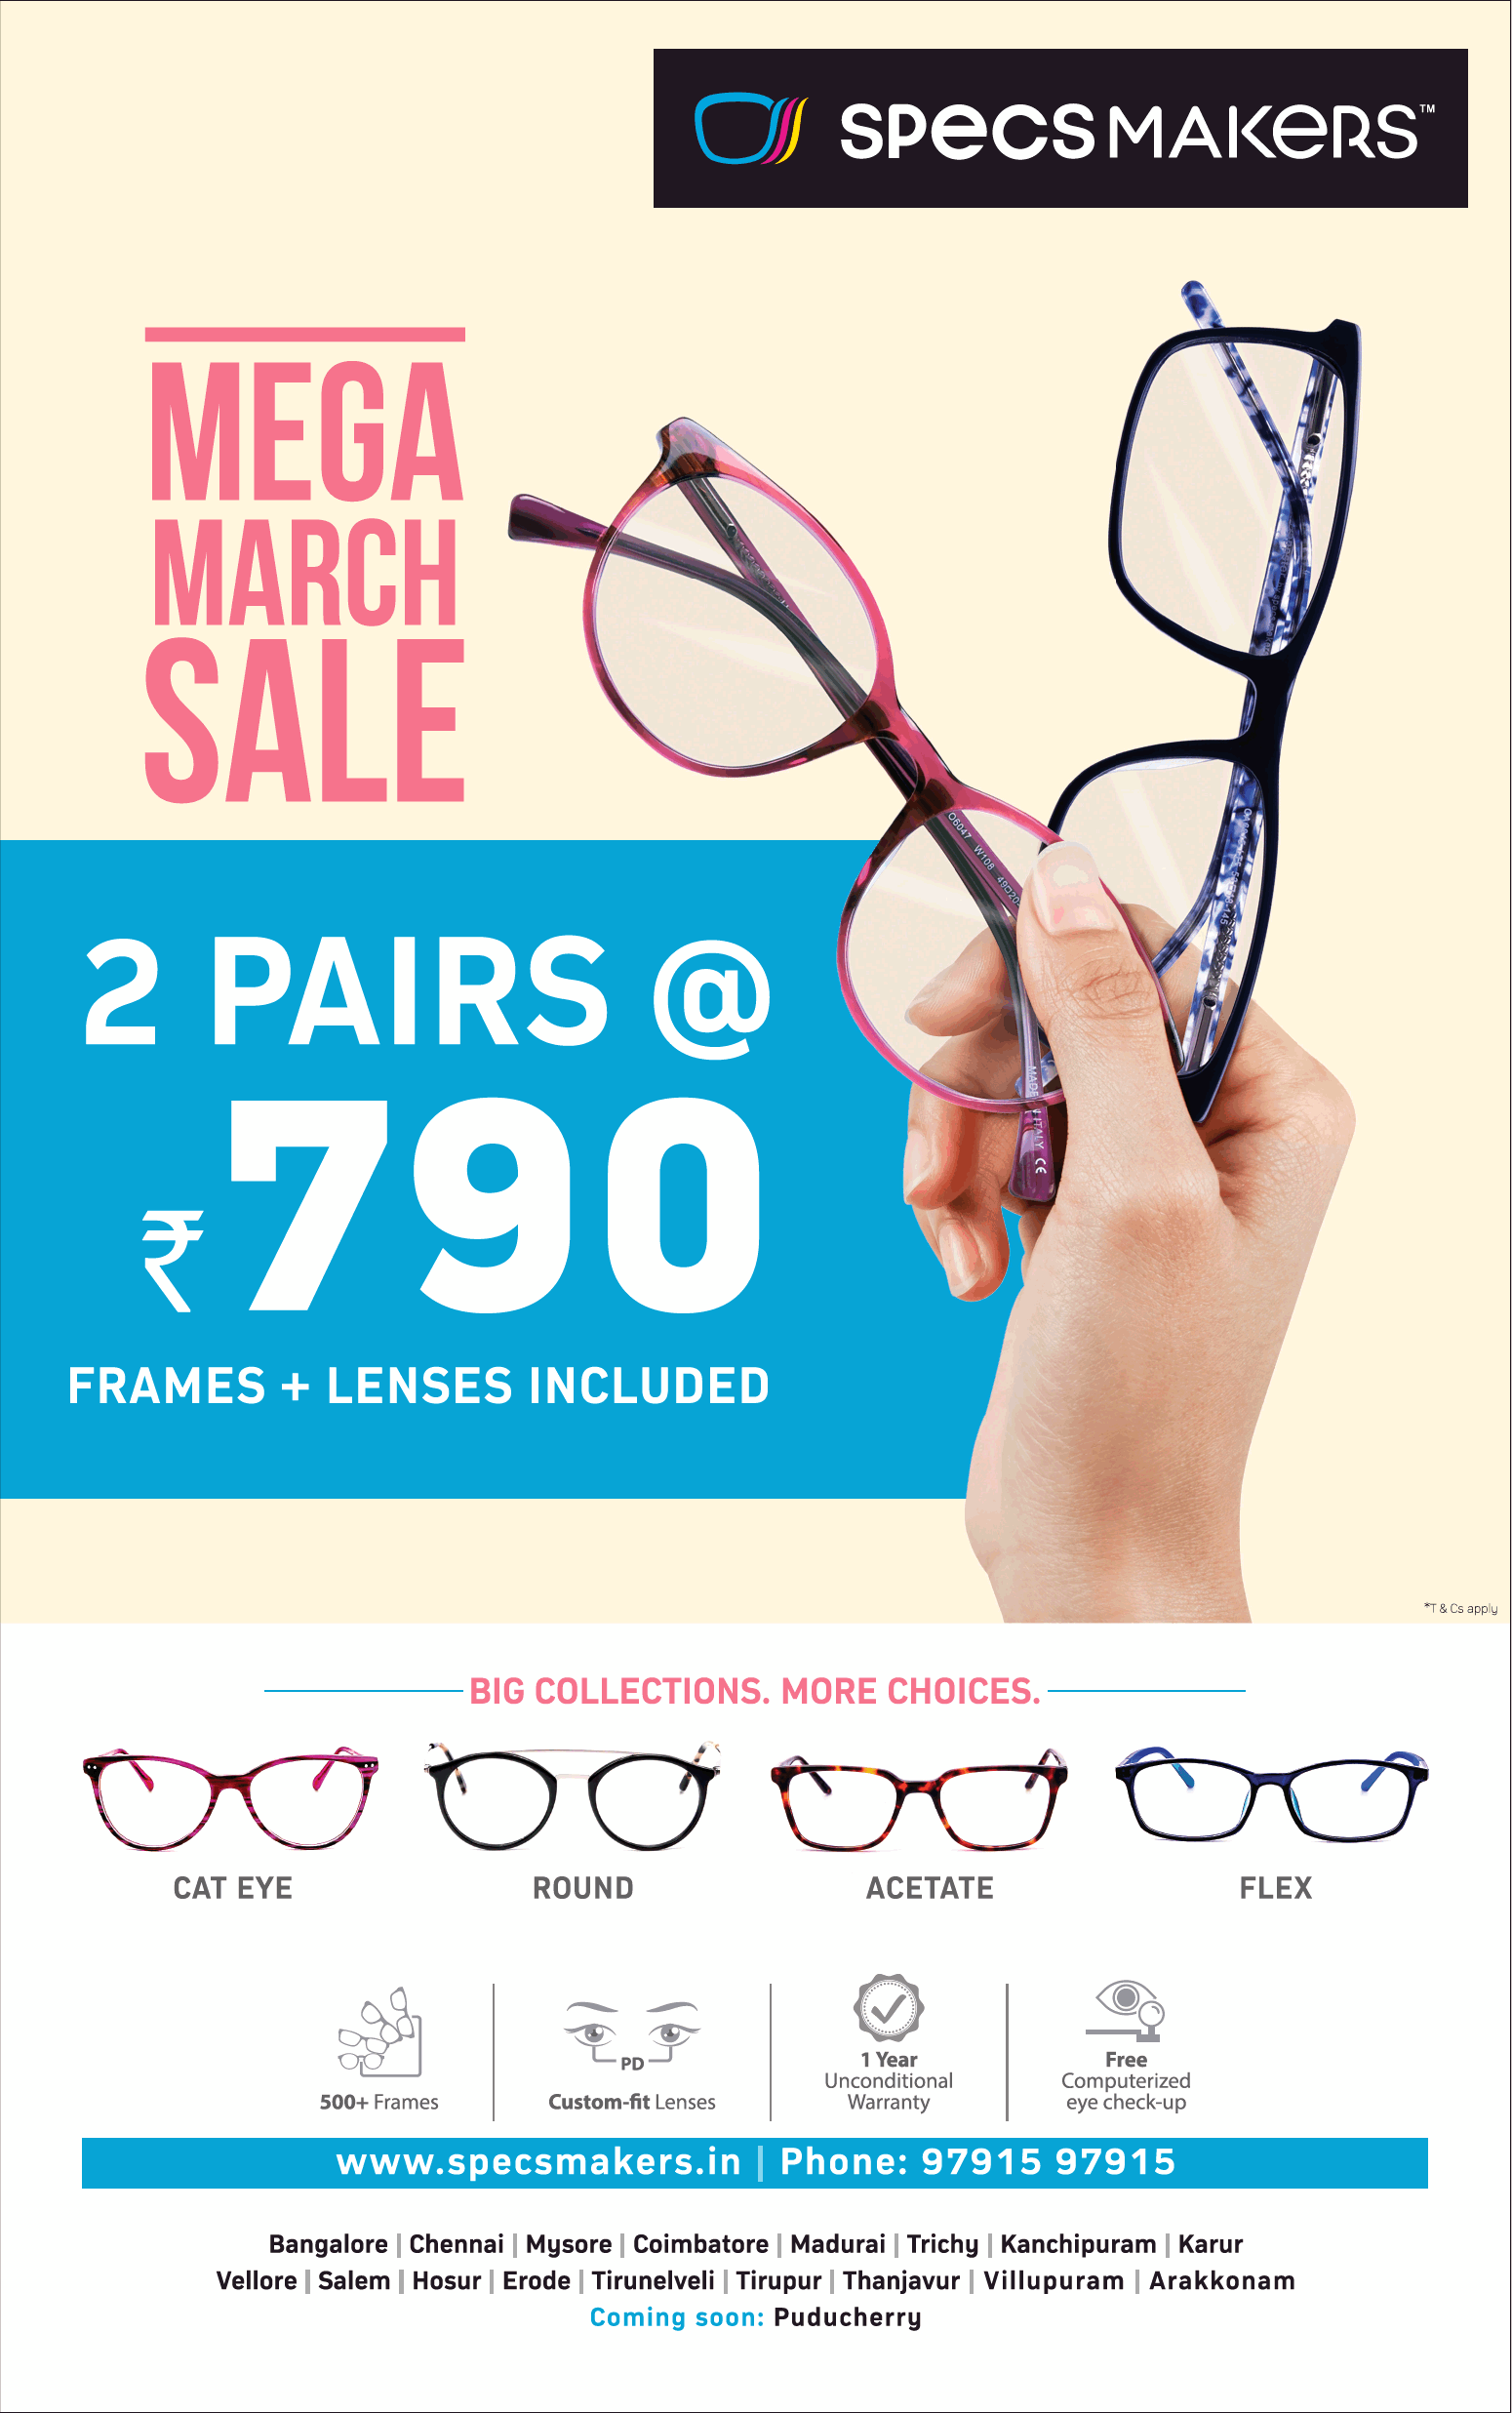 specs-makers-mega-march-sale-2-pairs-at-rs-790-ad-times-of-india-bangalore-02-03-2019.png